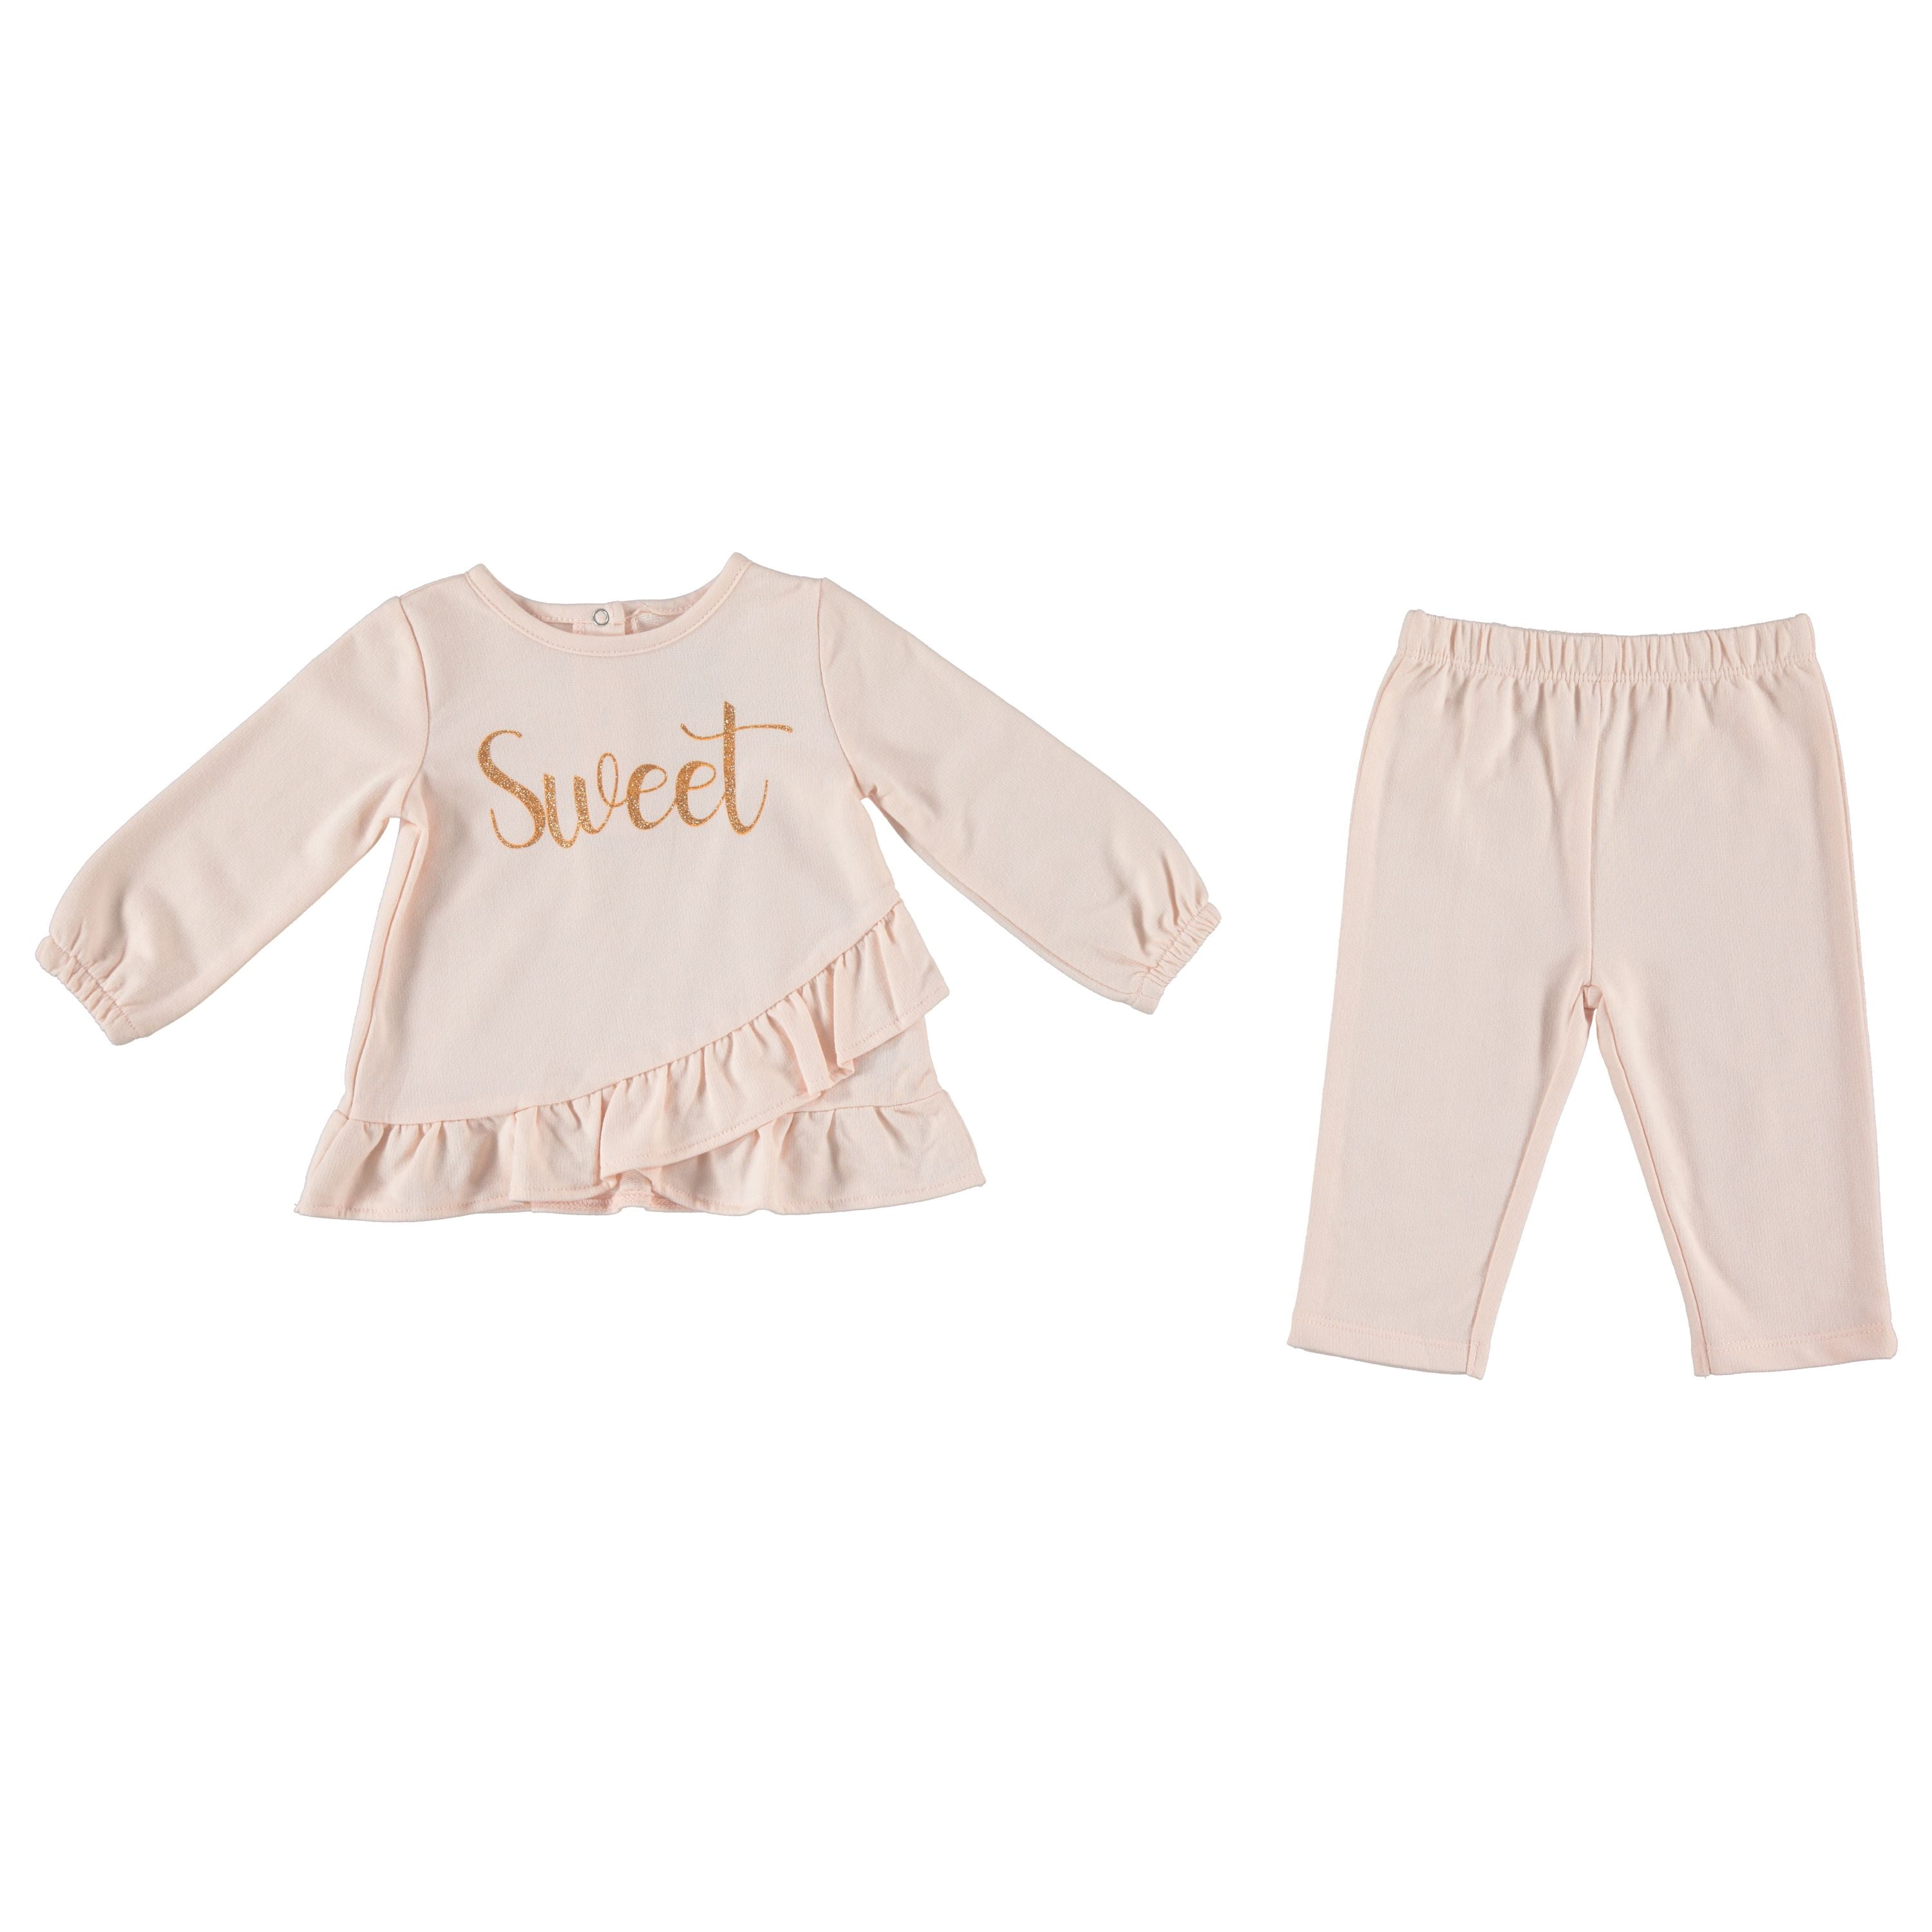 Details about   Carter’s Baby Girls’ 2-pack Pants Set 6M And 18M Sets Available 